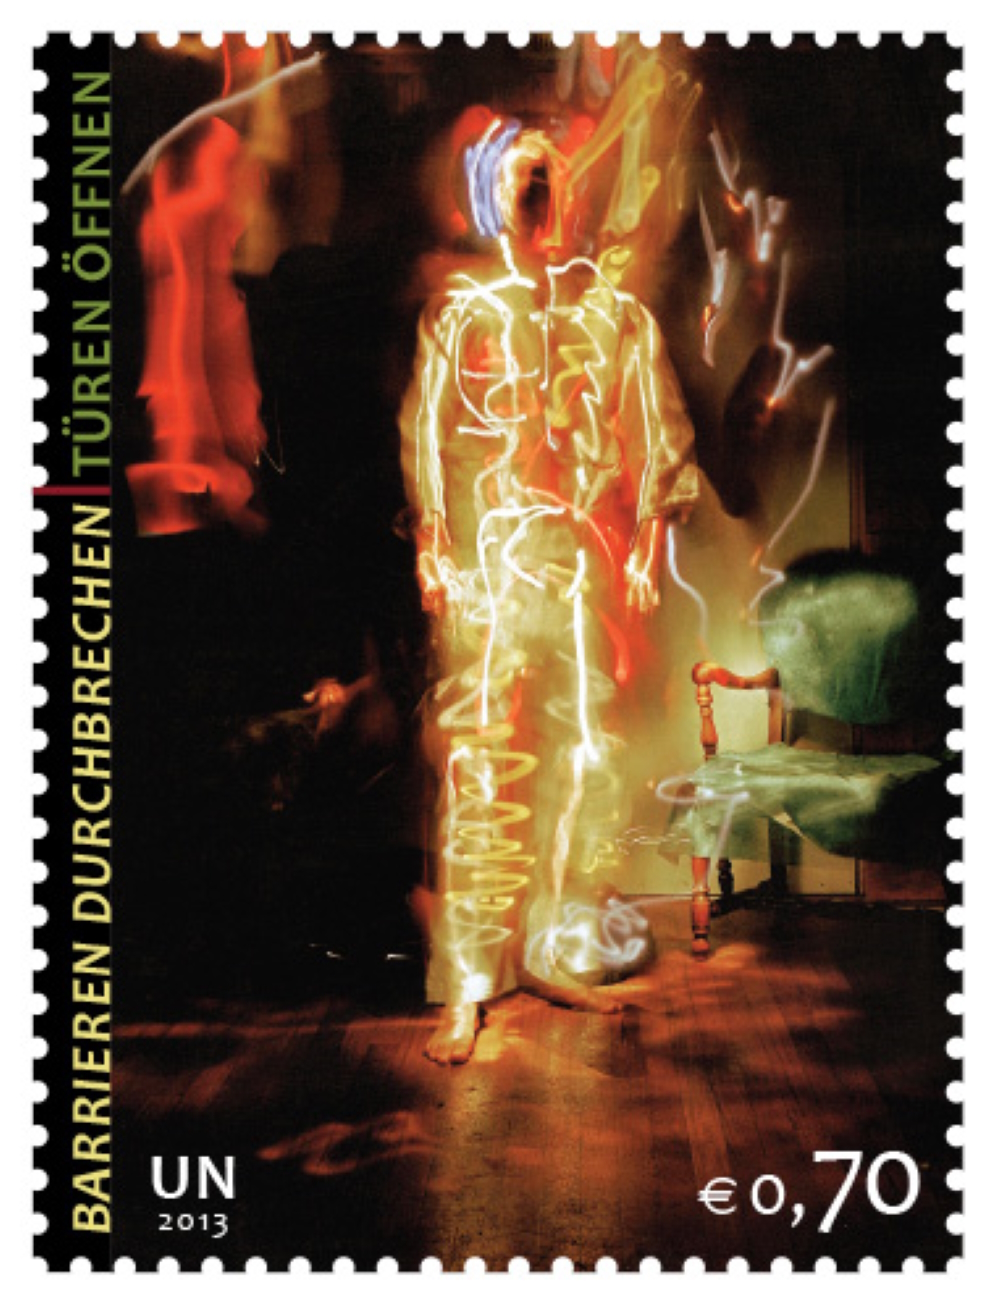 'Electro Man': issued as a United Nations postal stamp  in the 'Breaking Barriers/Open Doors'-series and released on September, 20th, 2013. The key visual in a huge format was shown in NCSI's episode 92 too.